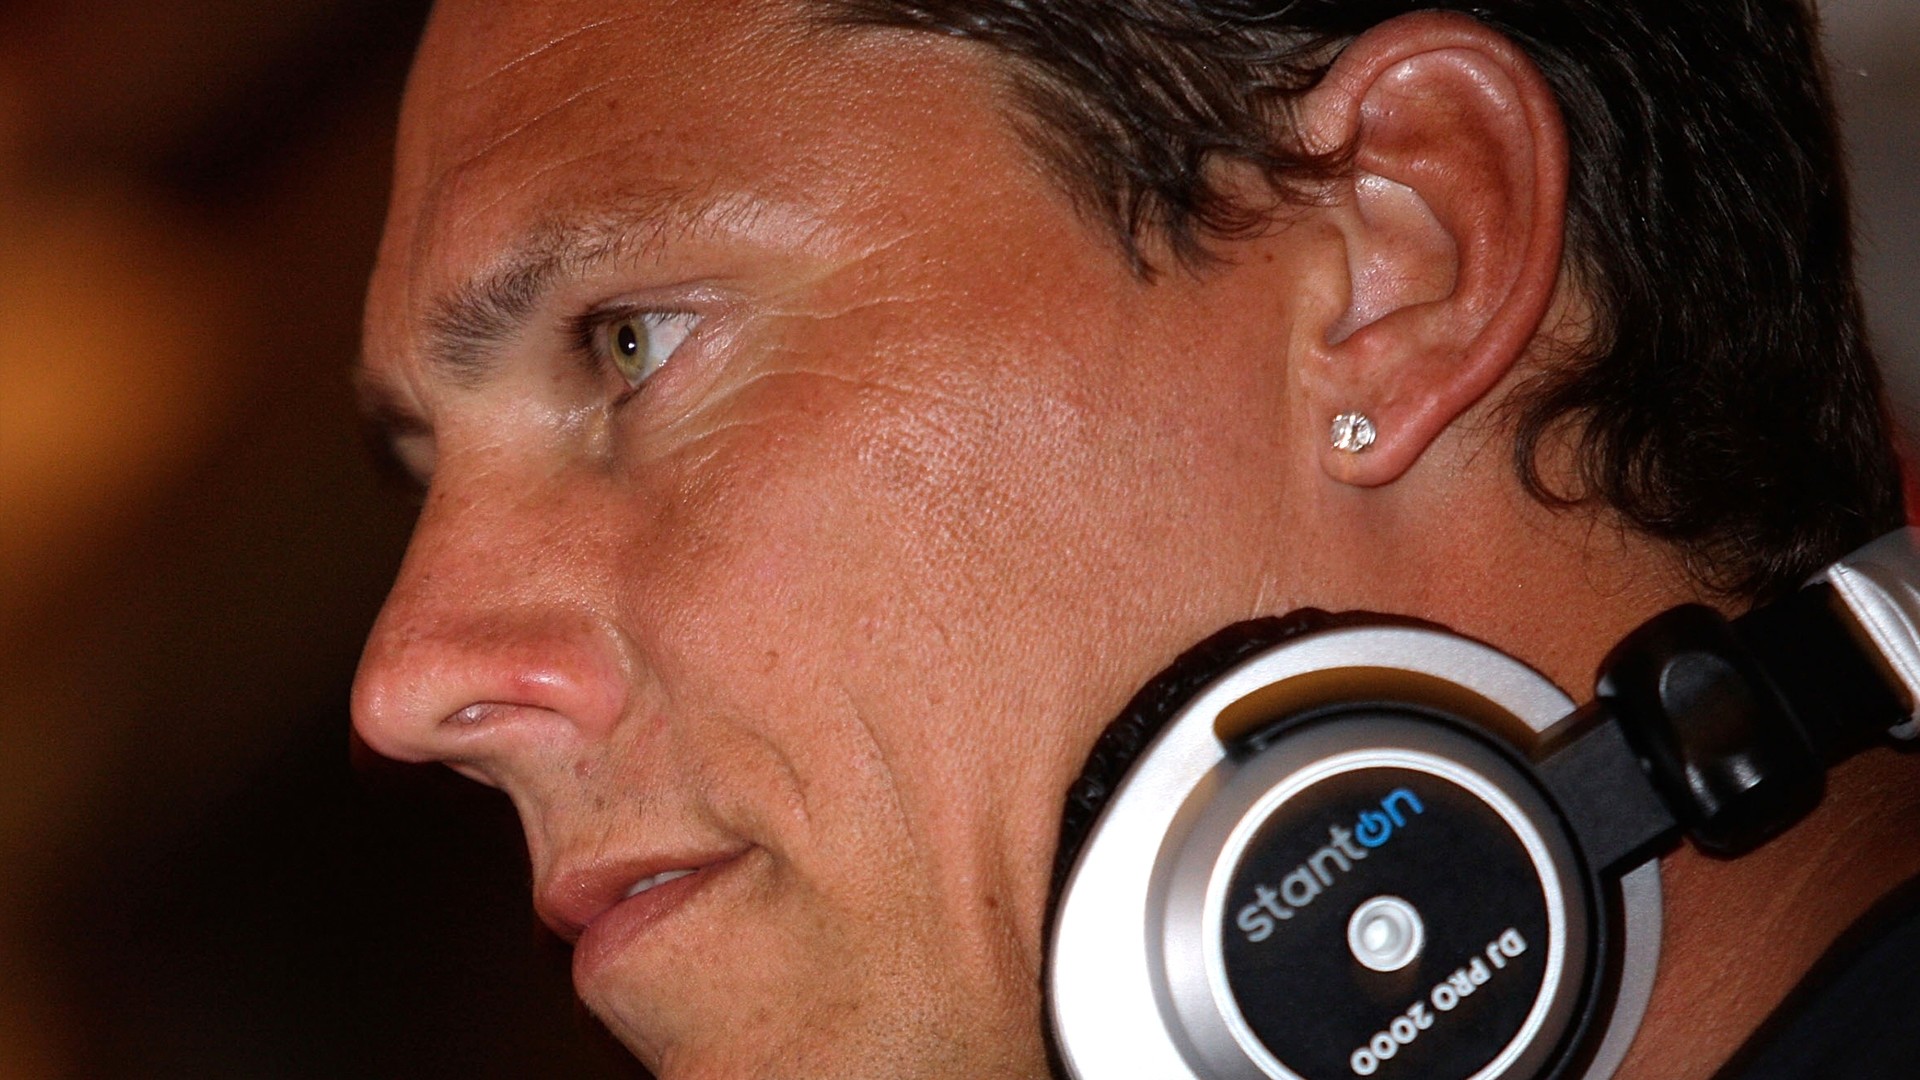 1920x1080 Get the latest dj tiesto, face, headphones news, pictures and videos and  learn all about dj tiesto, face, headphones from wallpapers4u.org, your  wallpaper ...